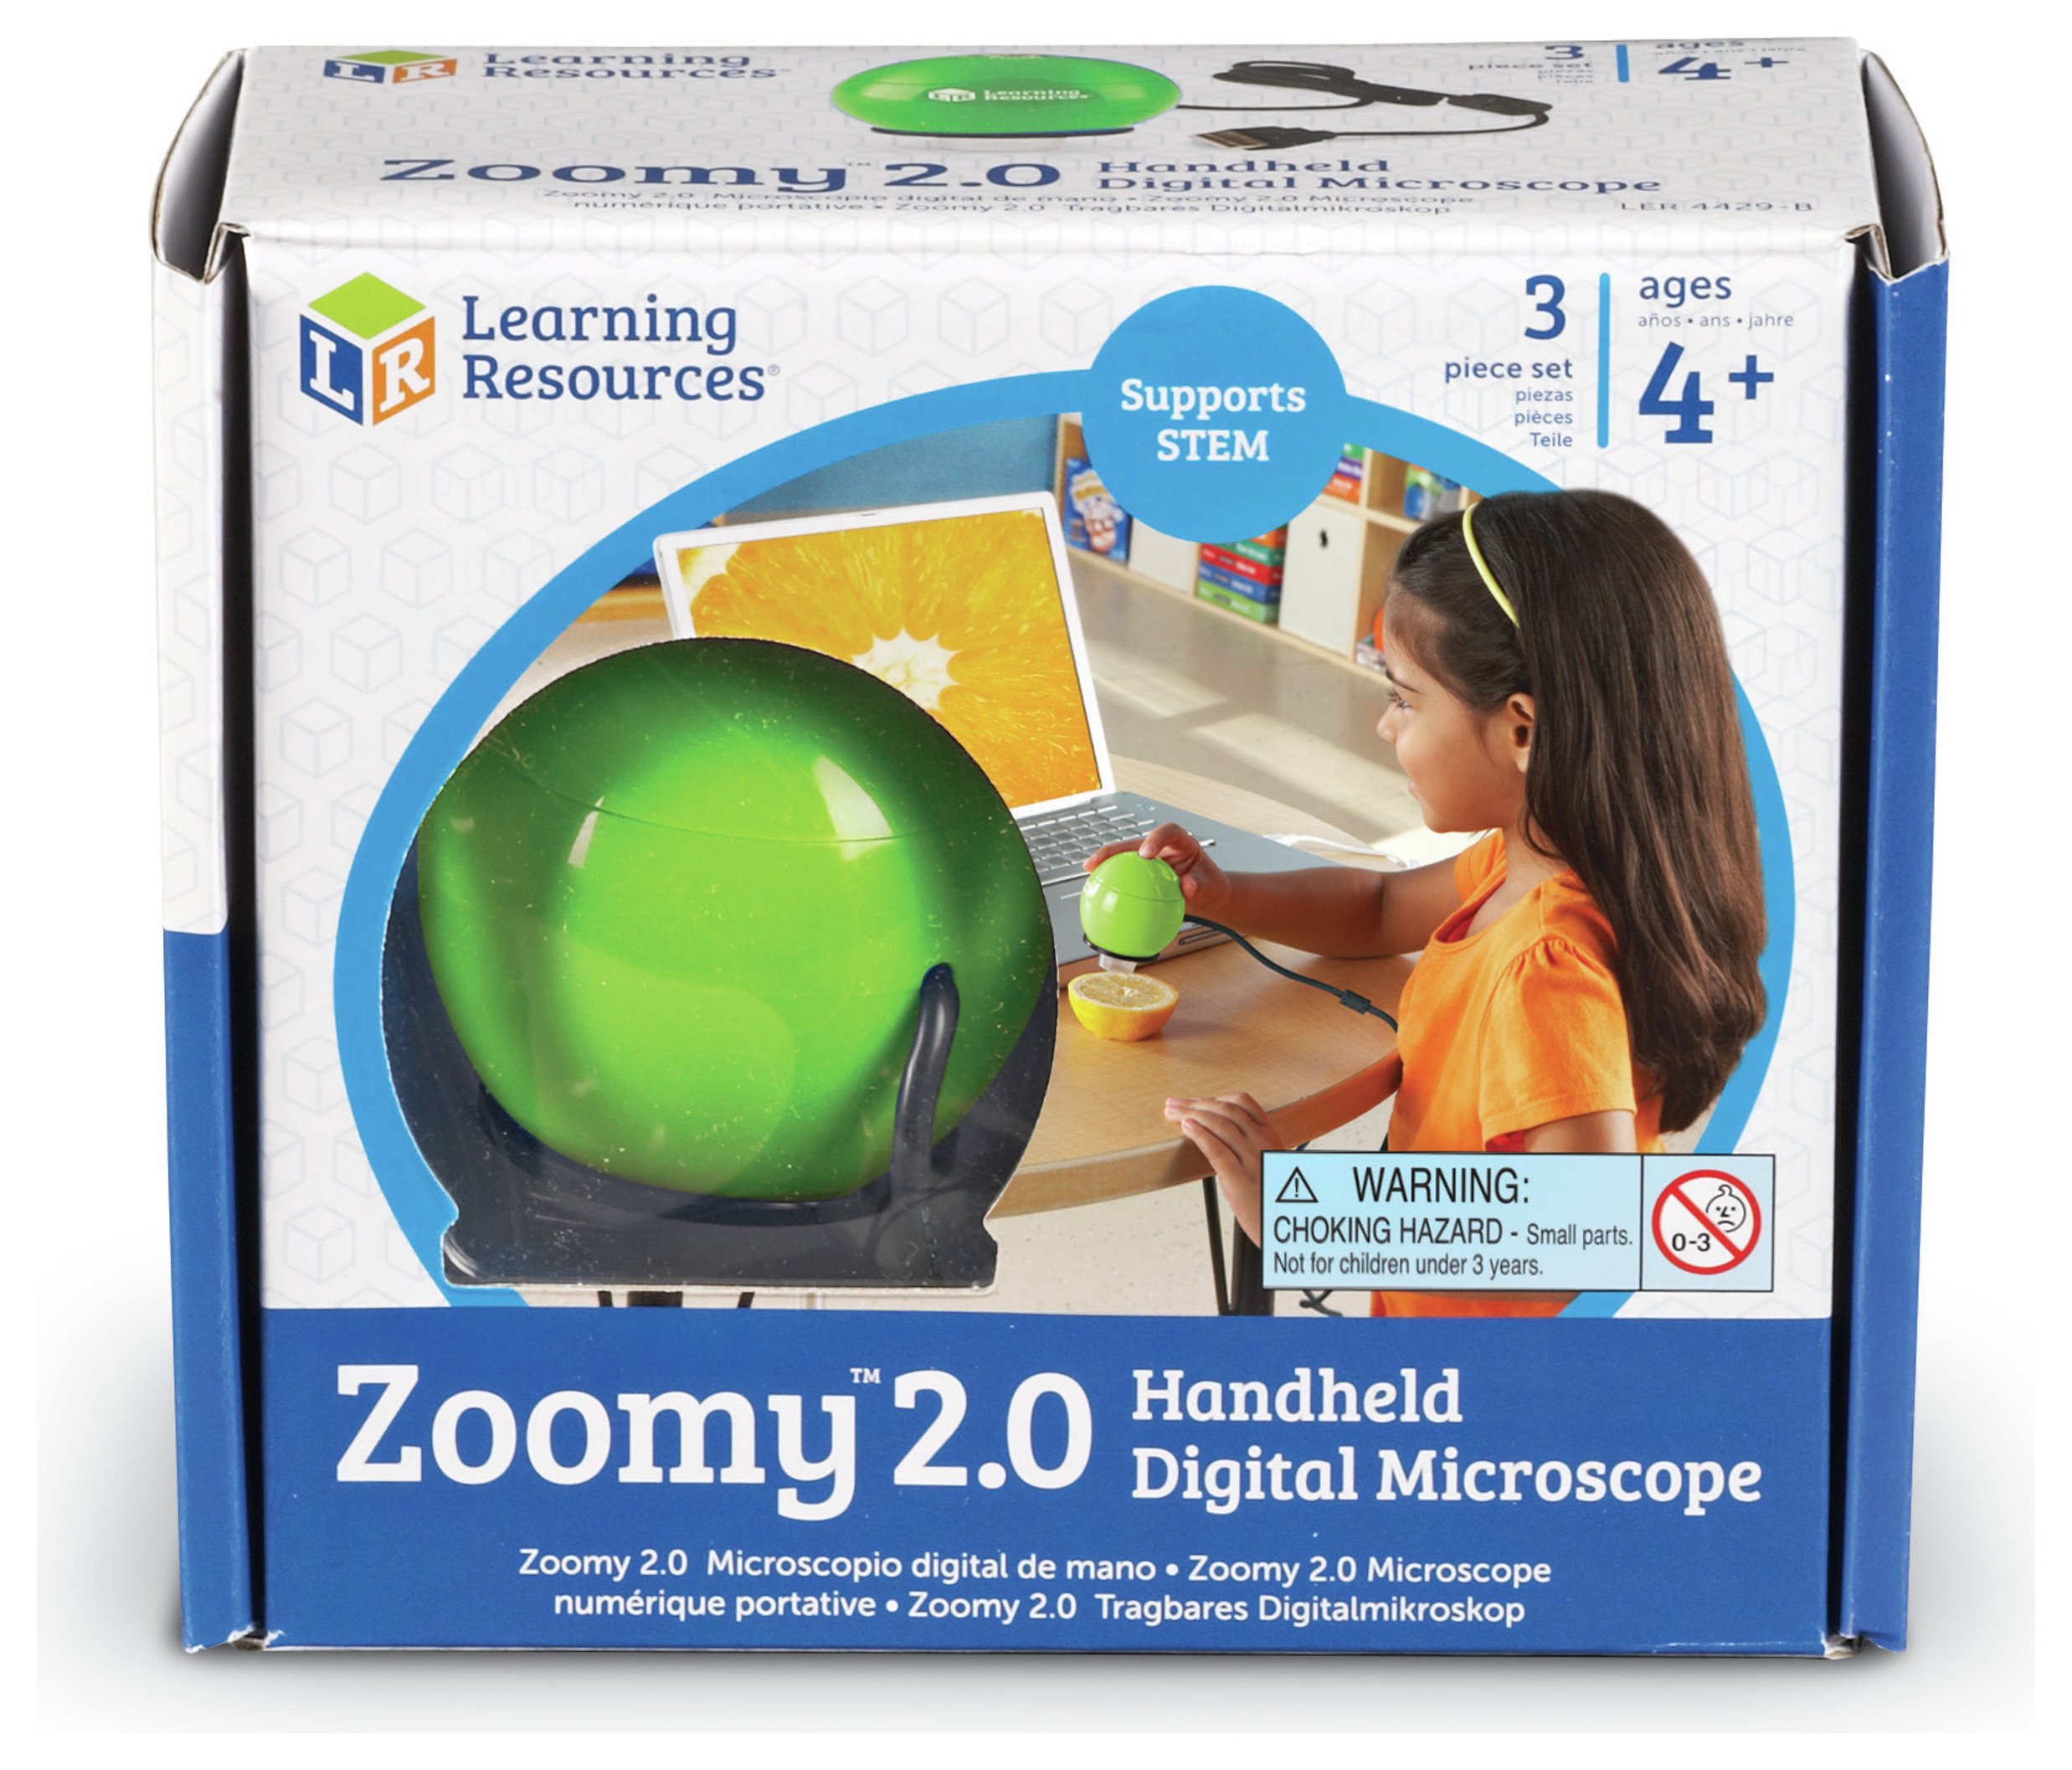 Learning Resources Zoomy 2.0 Handheld Microscope - Green